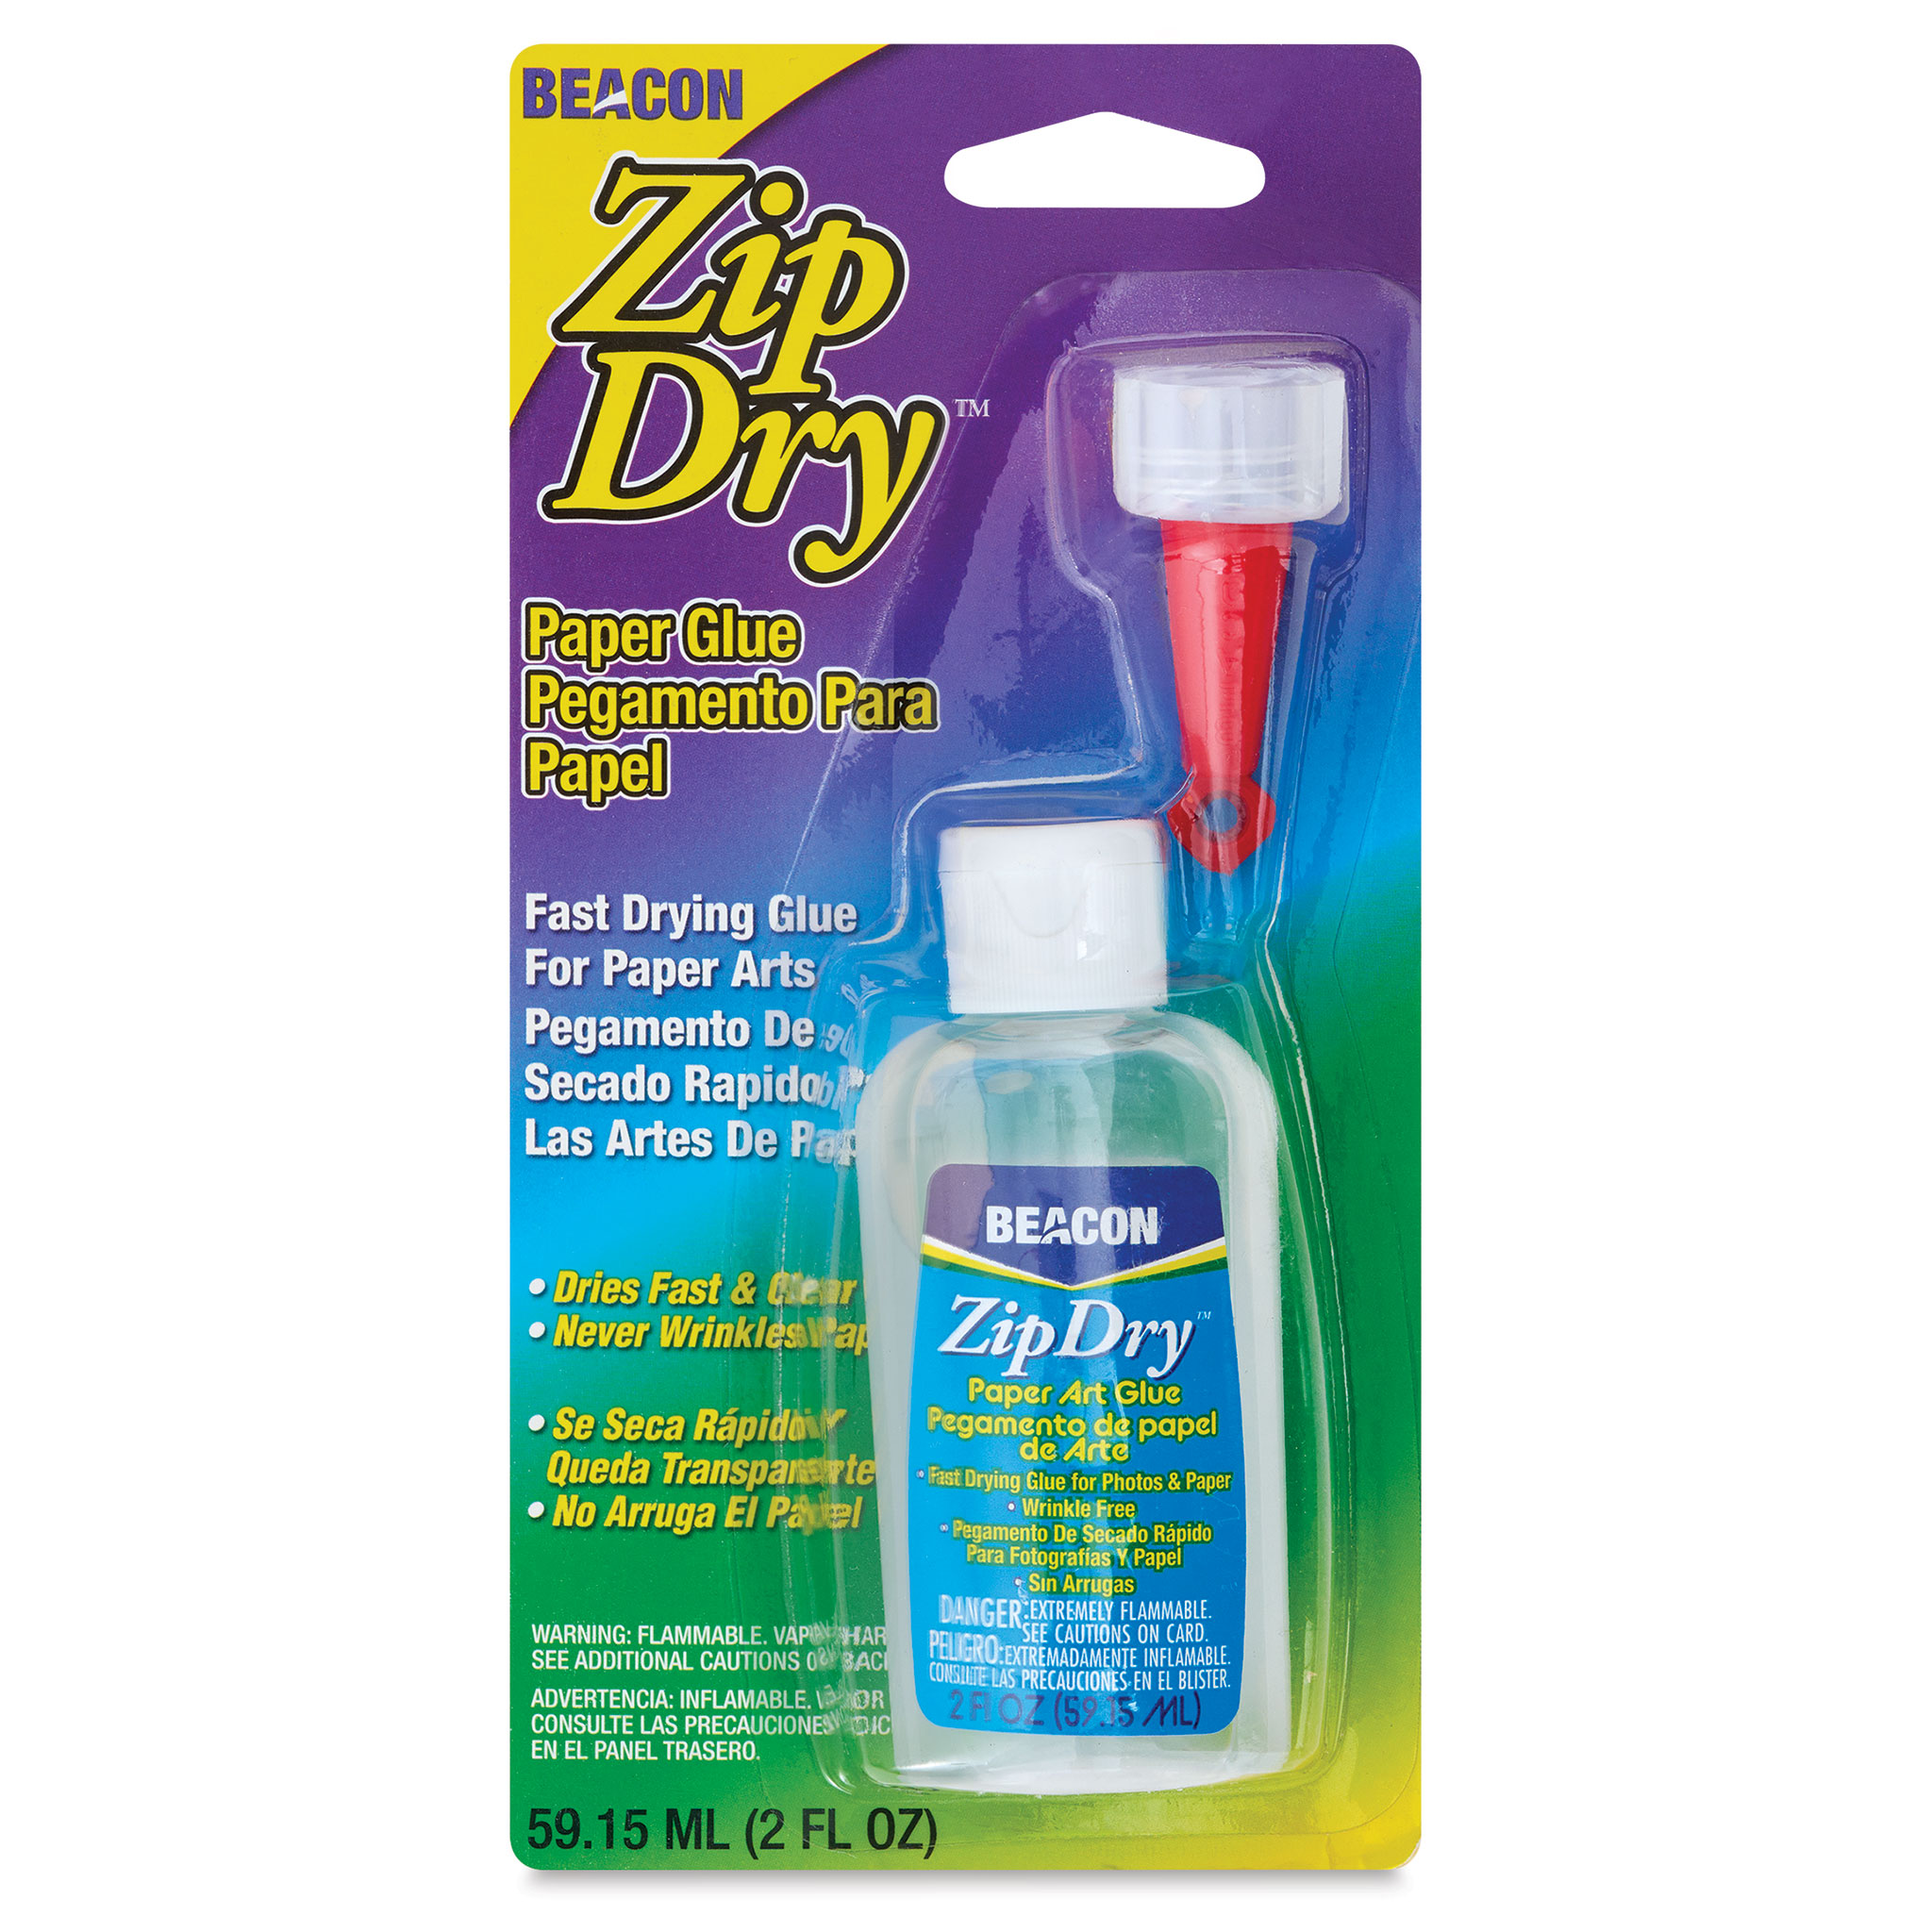 Zip Dry Paper Glue, Adhesives, Conservation Supplies, Preservation